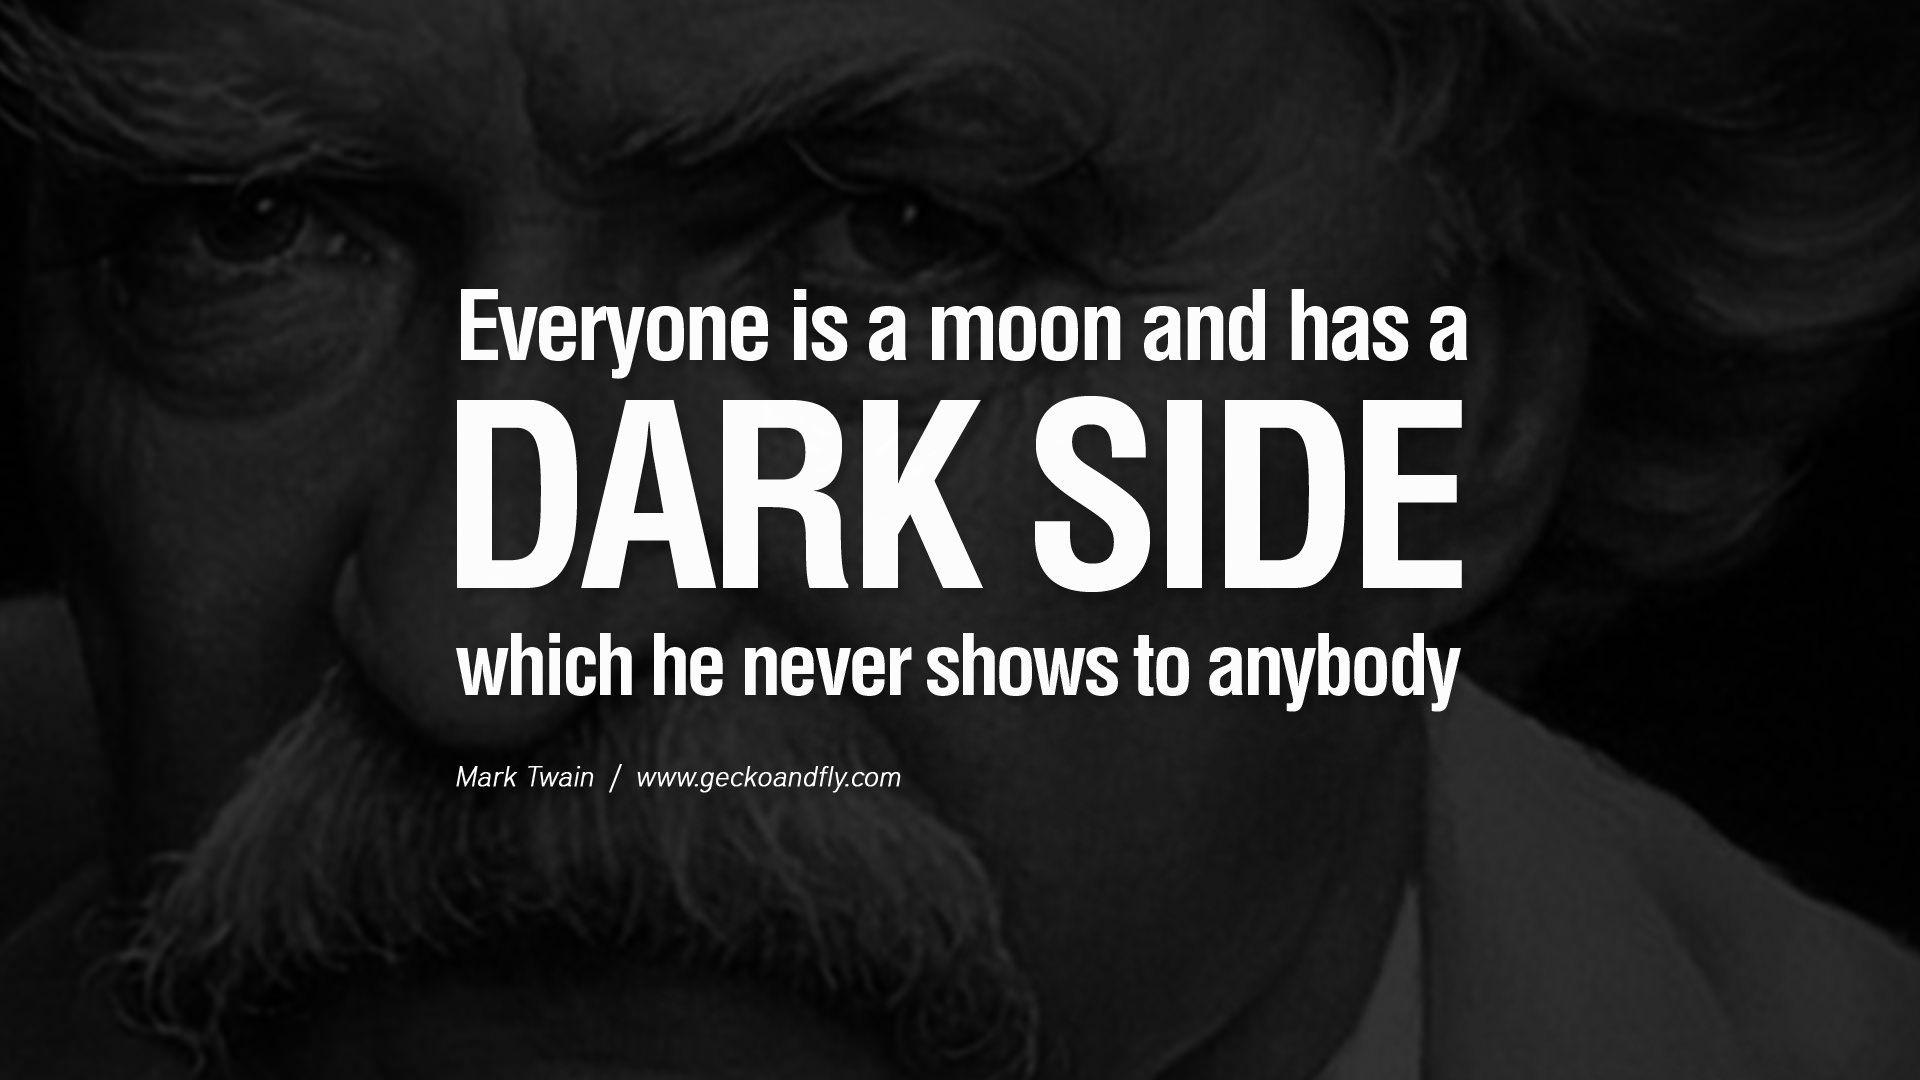 Wise Quotes By Mark Twain On Wisdom, Human Nature, Life And Mankind